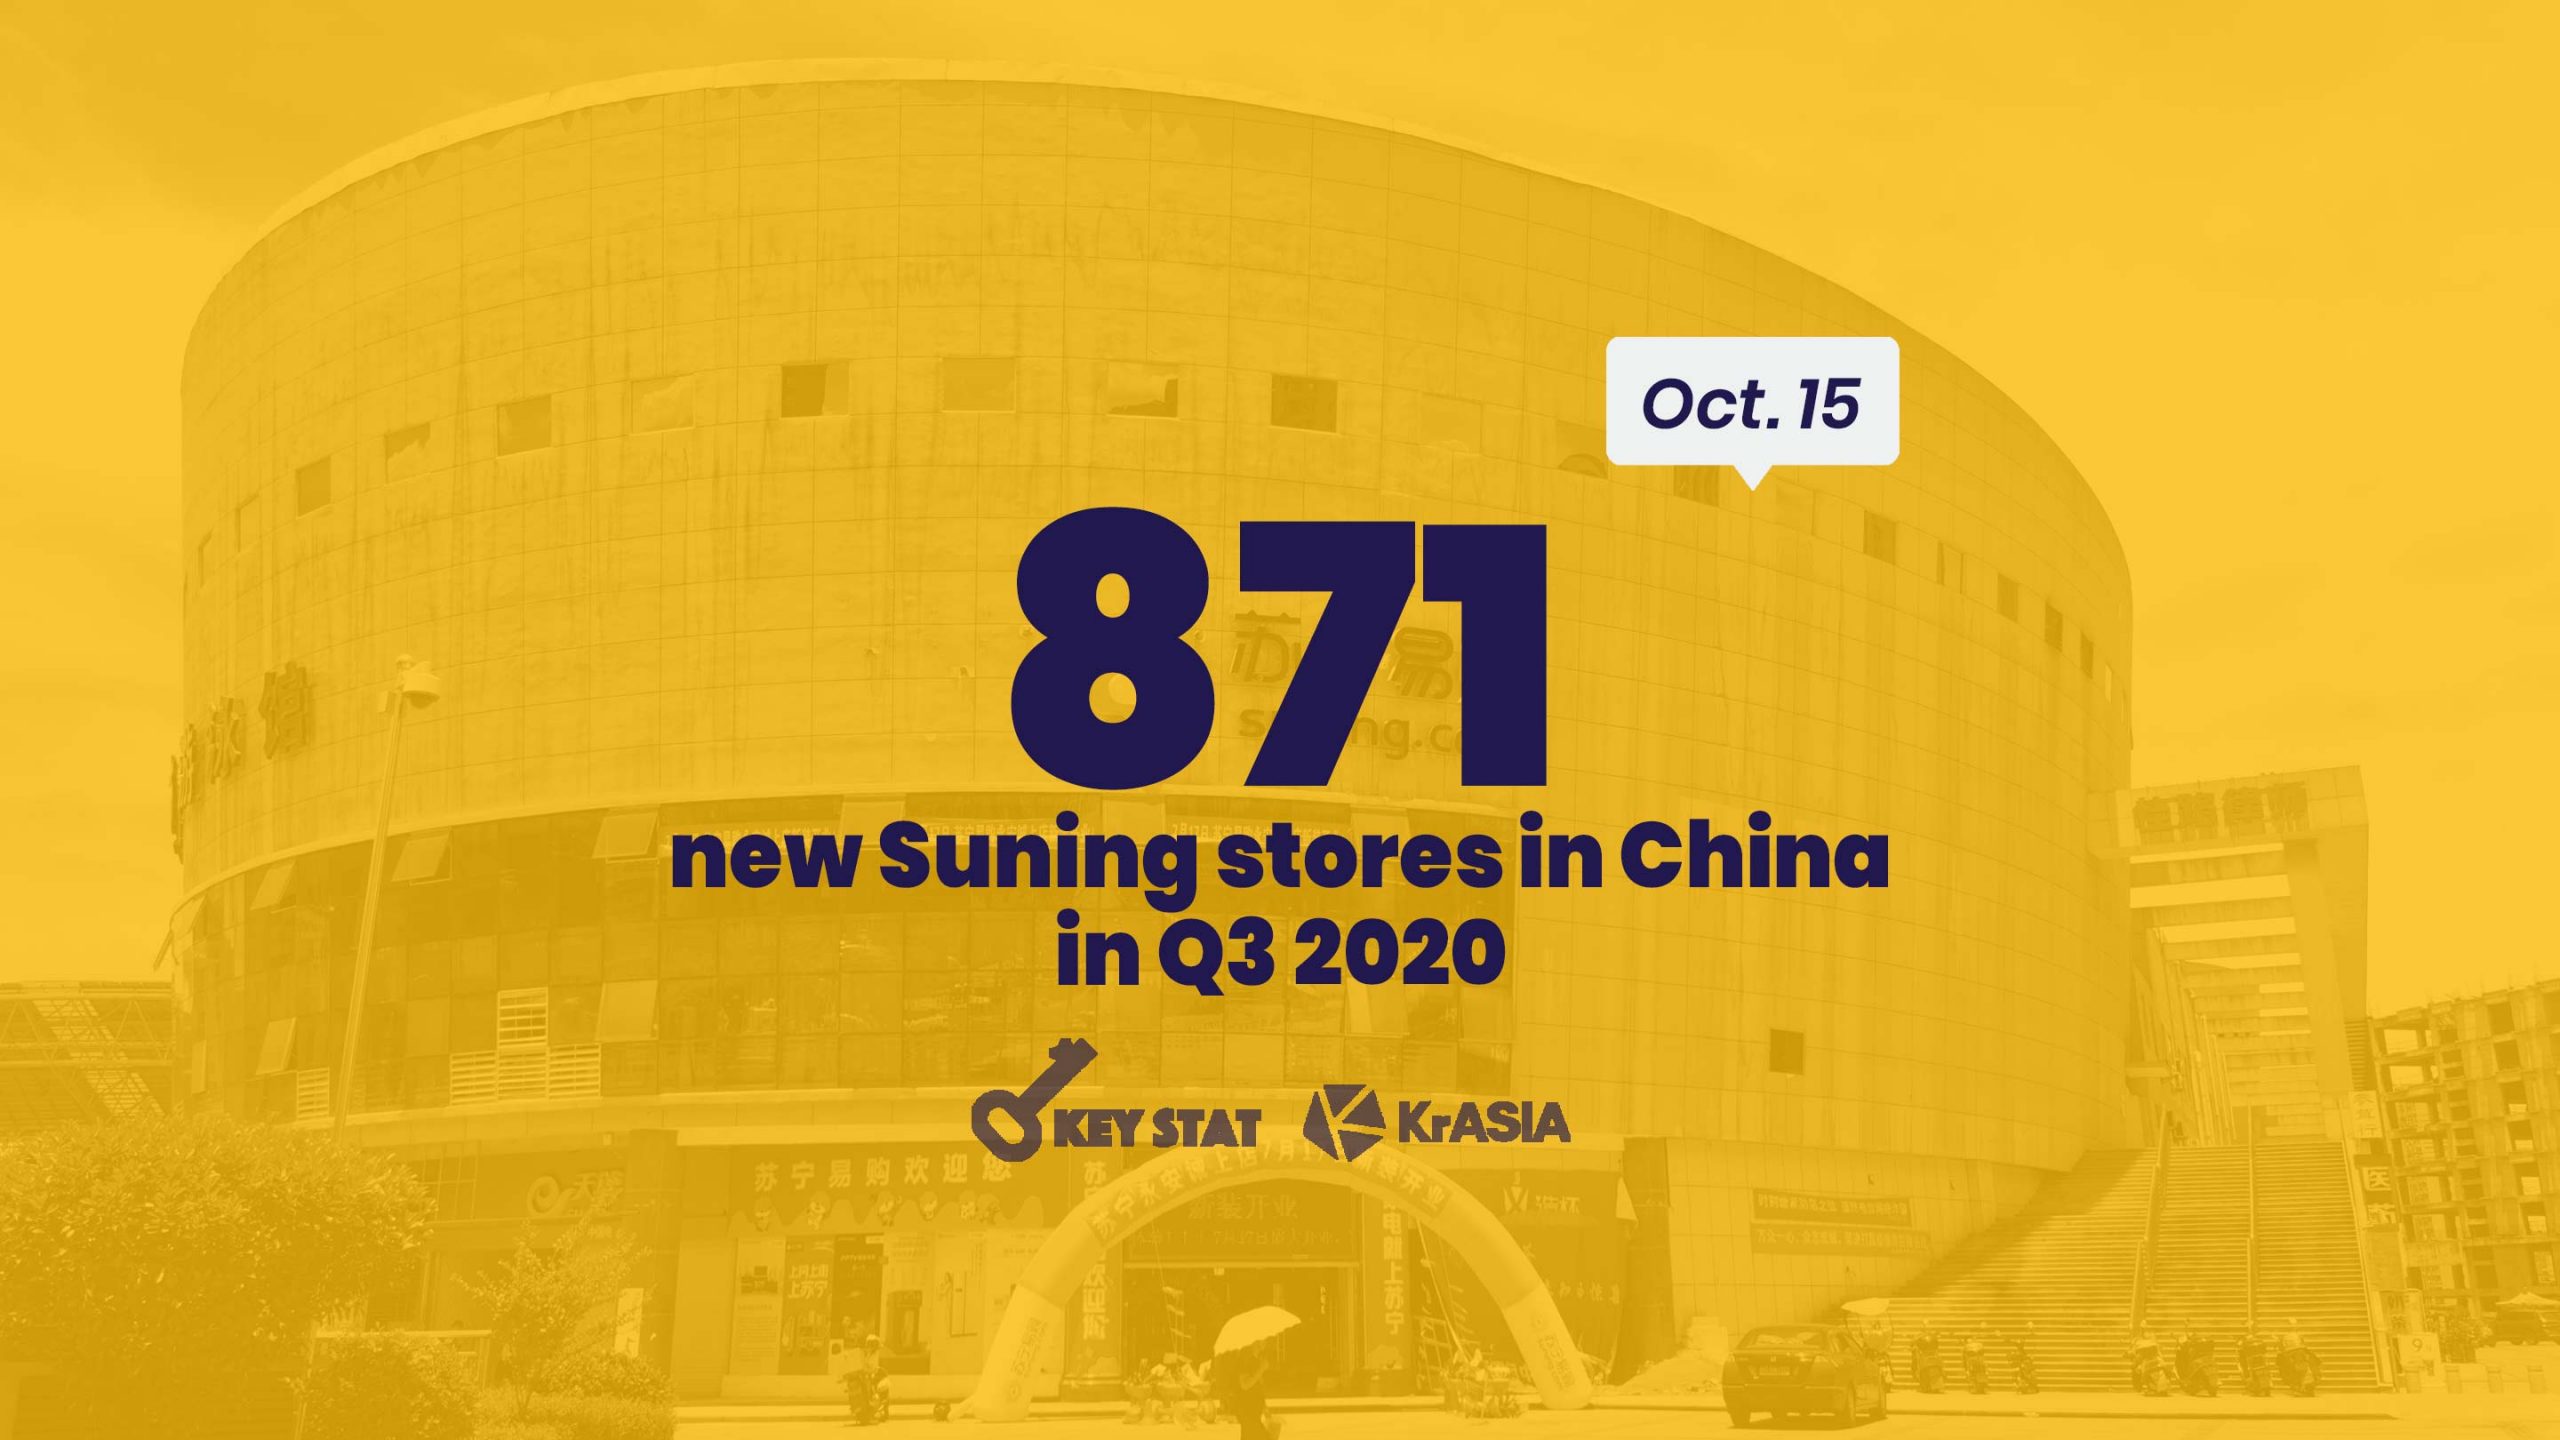 KEY STAT | Carrefour China owner Suning opens 871 new stores in Q3